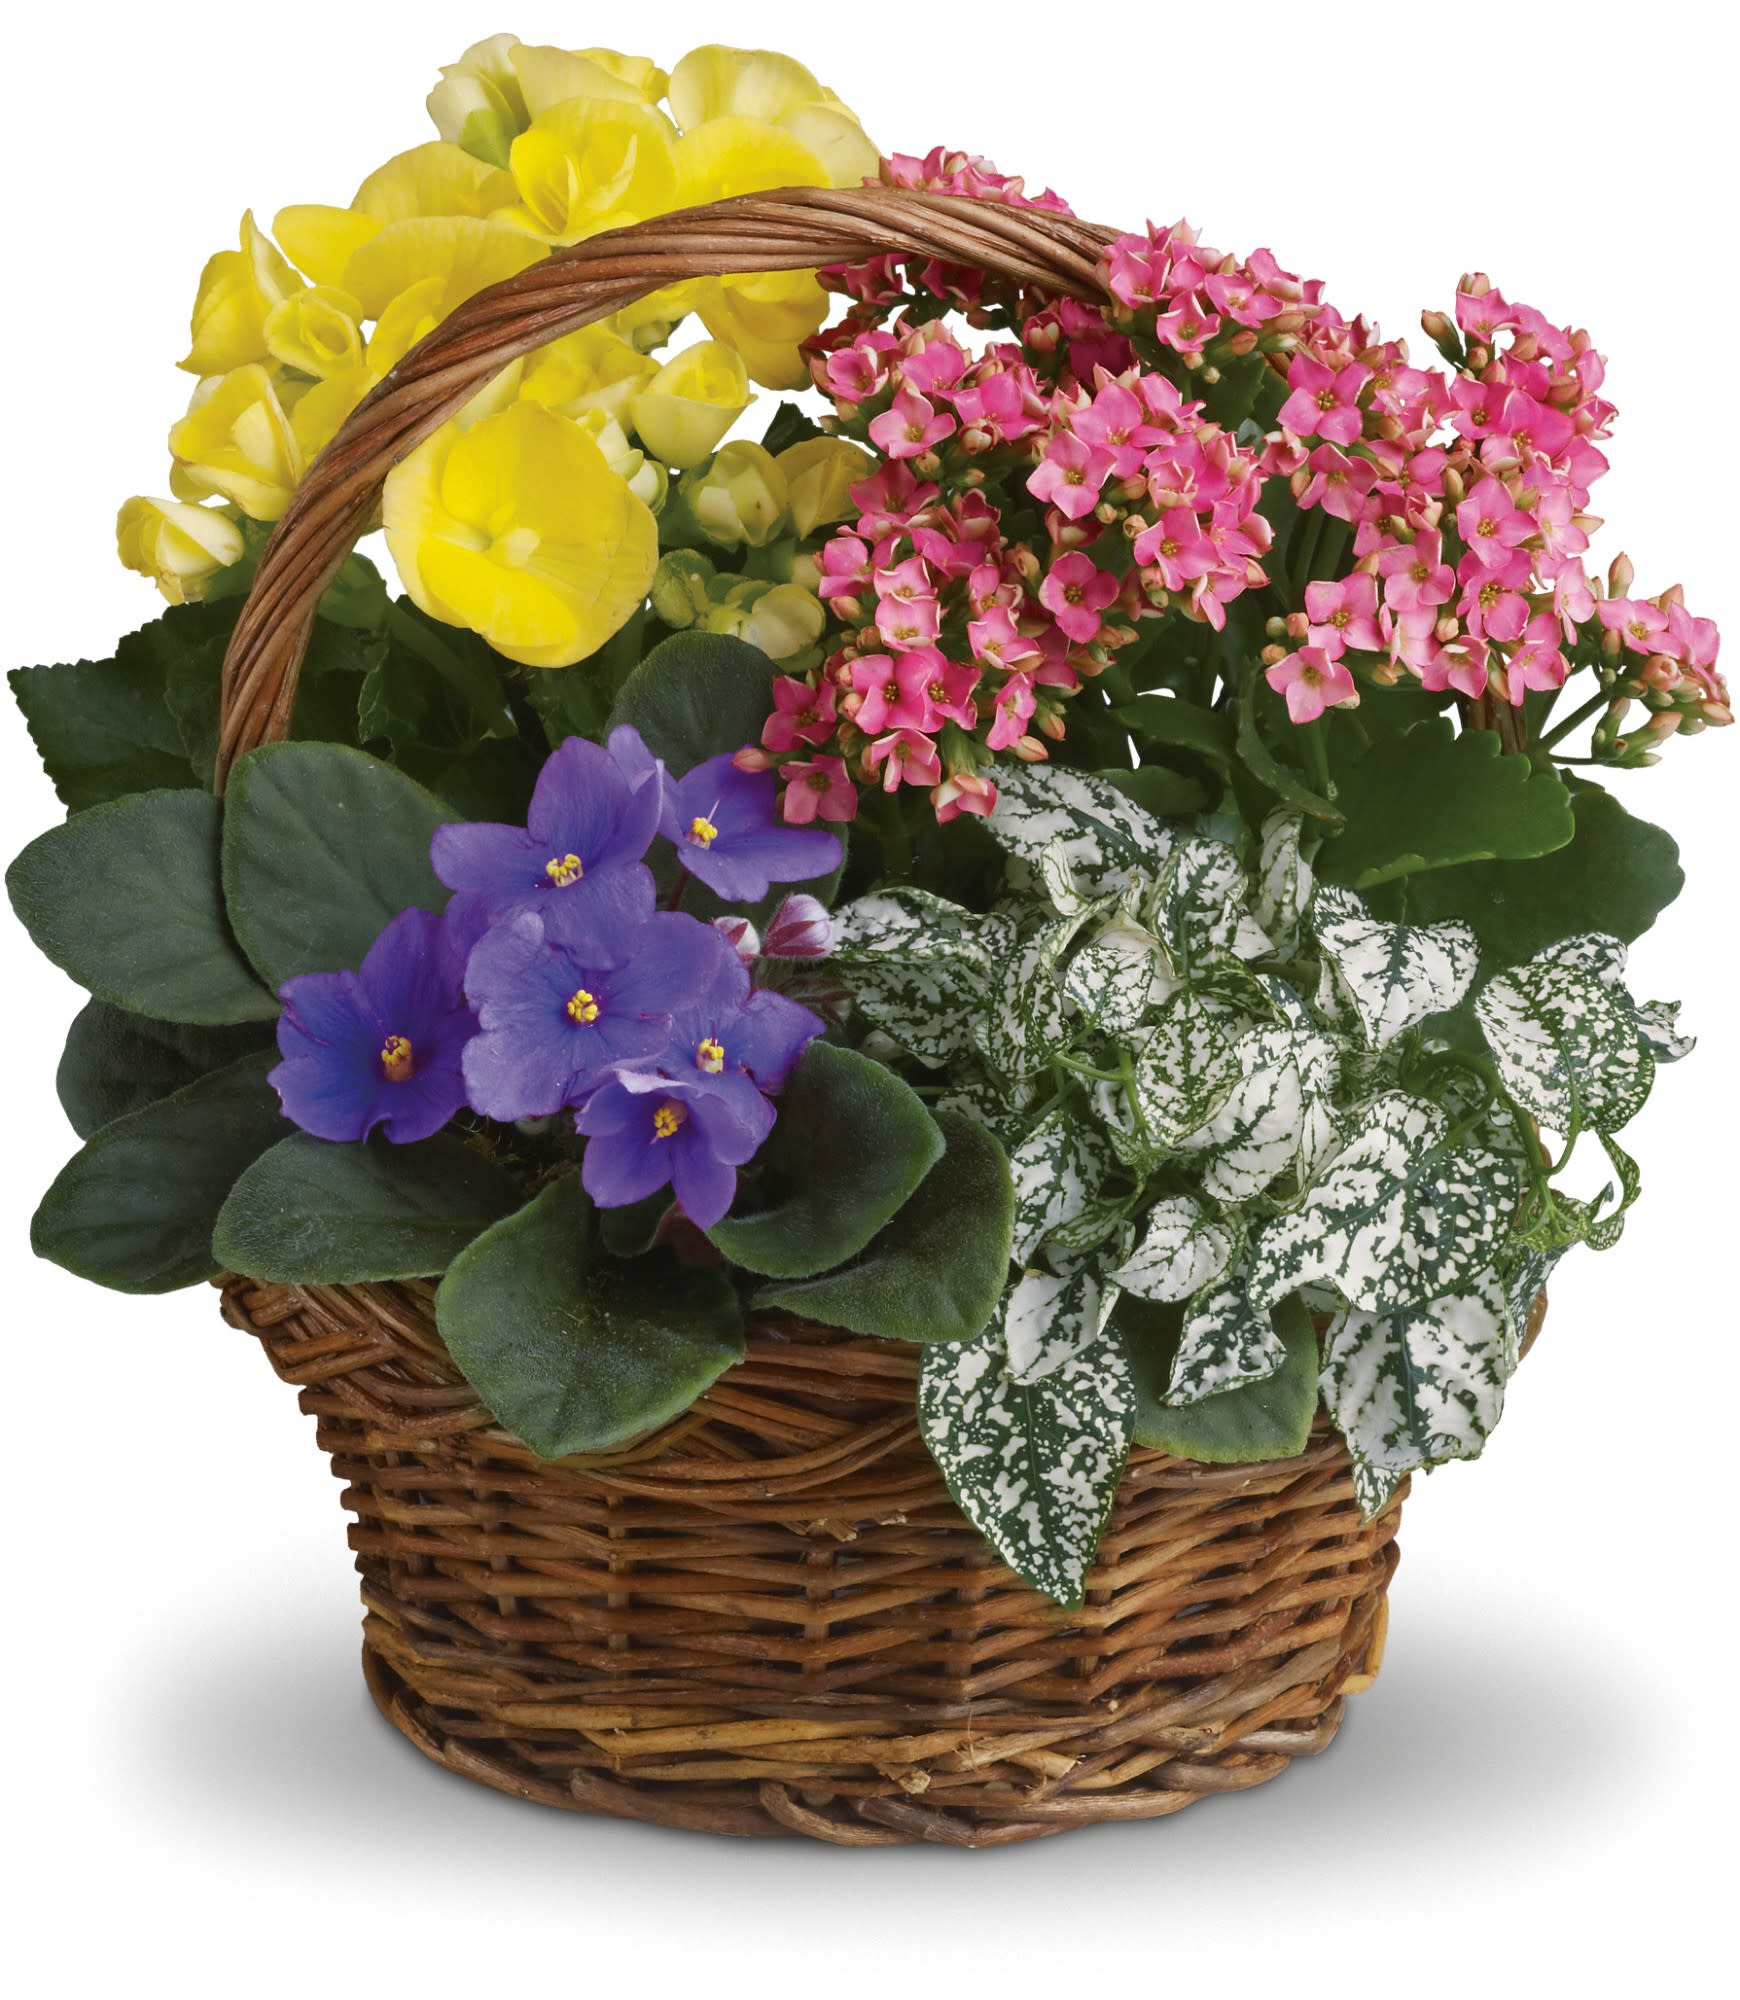 Spring Has Sprung Mixed Basket - A purple African violet, yellow begonia, pink kalanchoe and white hypoestes are arranged in a pretty round basket. It's blooming beautiful. Approximately 12&quot; W x 12 1/2&quot; H. T93-1AÂ  